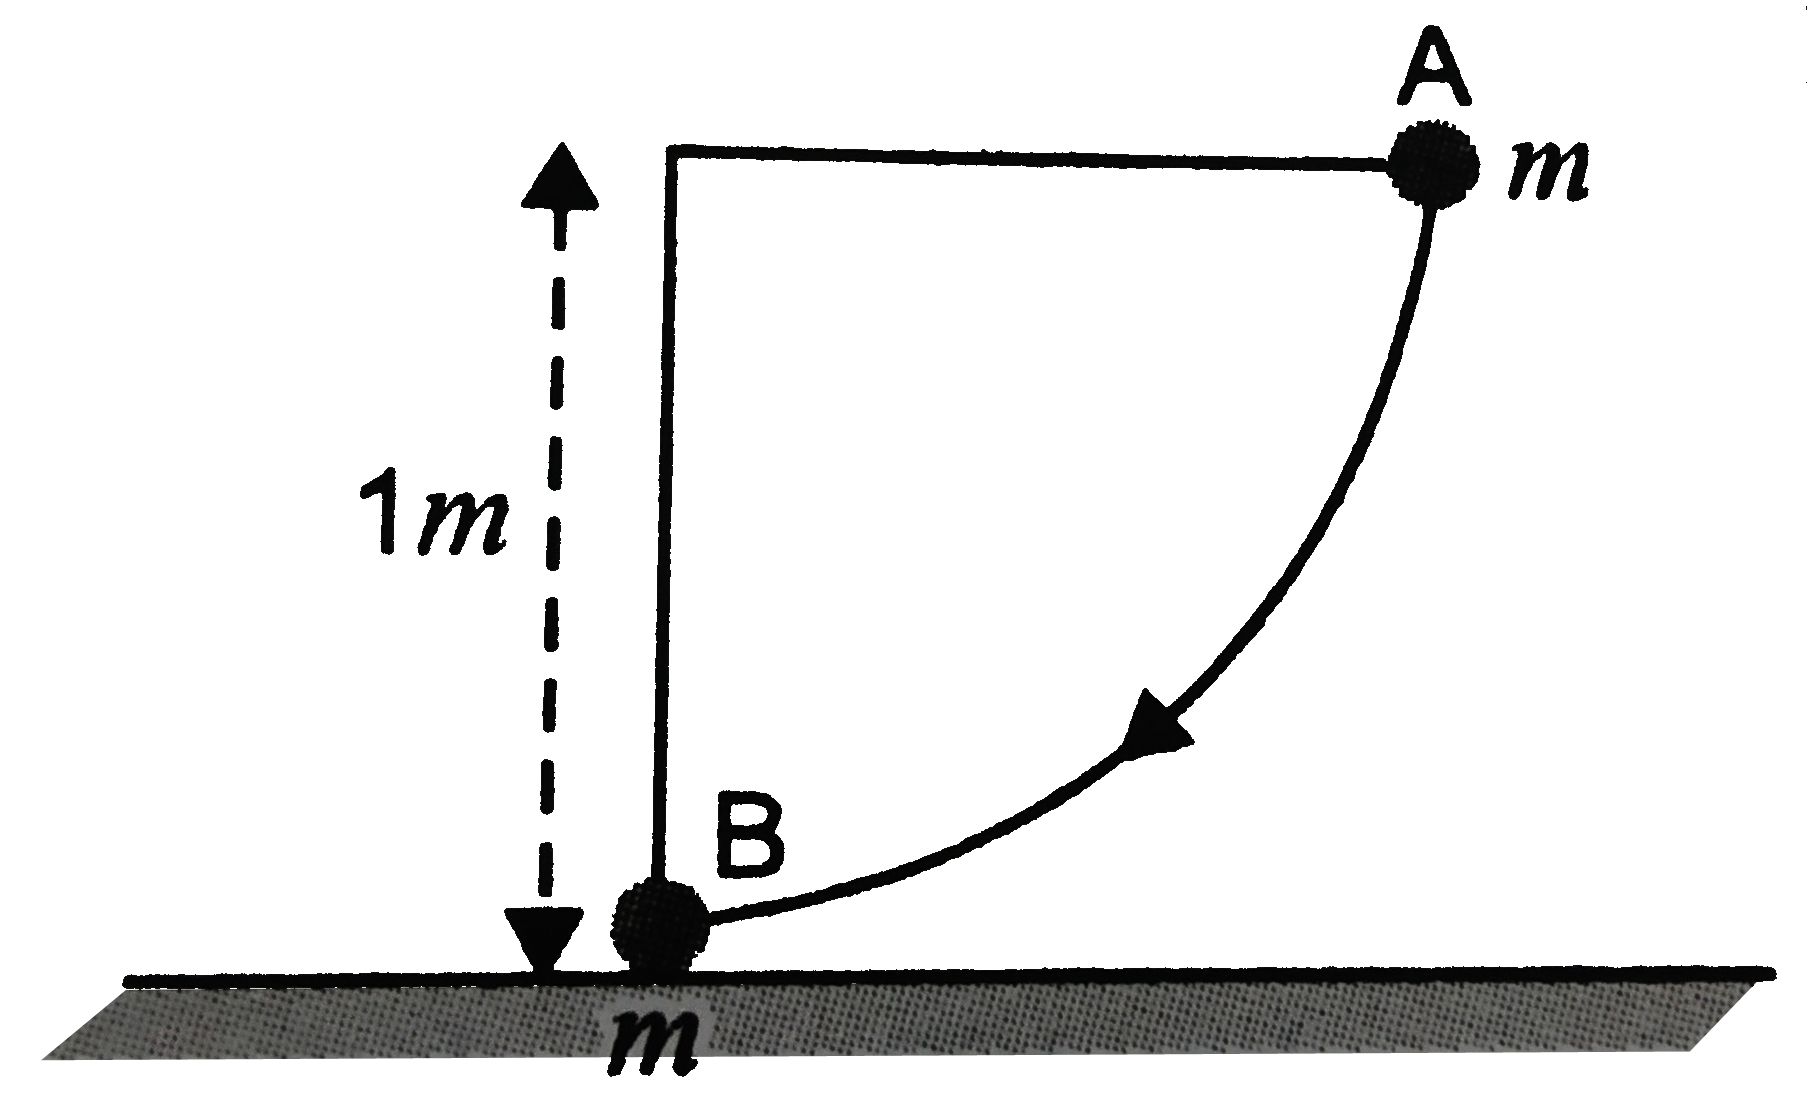 The bob A of a pendulum released from horizontal to the vertical hits another bob B of the same mass at rest on a table as shown in figure.   If the length of the pendulum is 1m, calculate   (a) the height to which bob A will rise after collision.   (b) the speed with which bob B  starts moving.   Neglect the size of the bobs and assume the collision to be elastic.